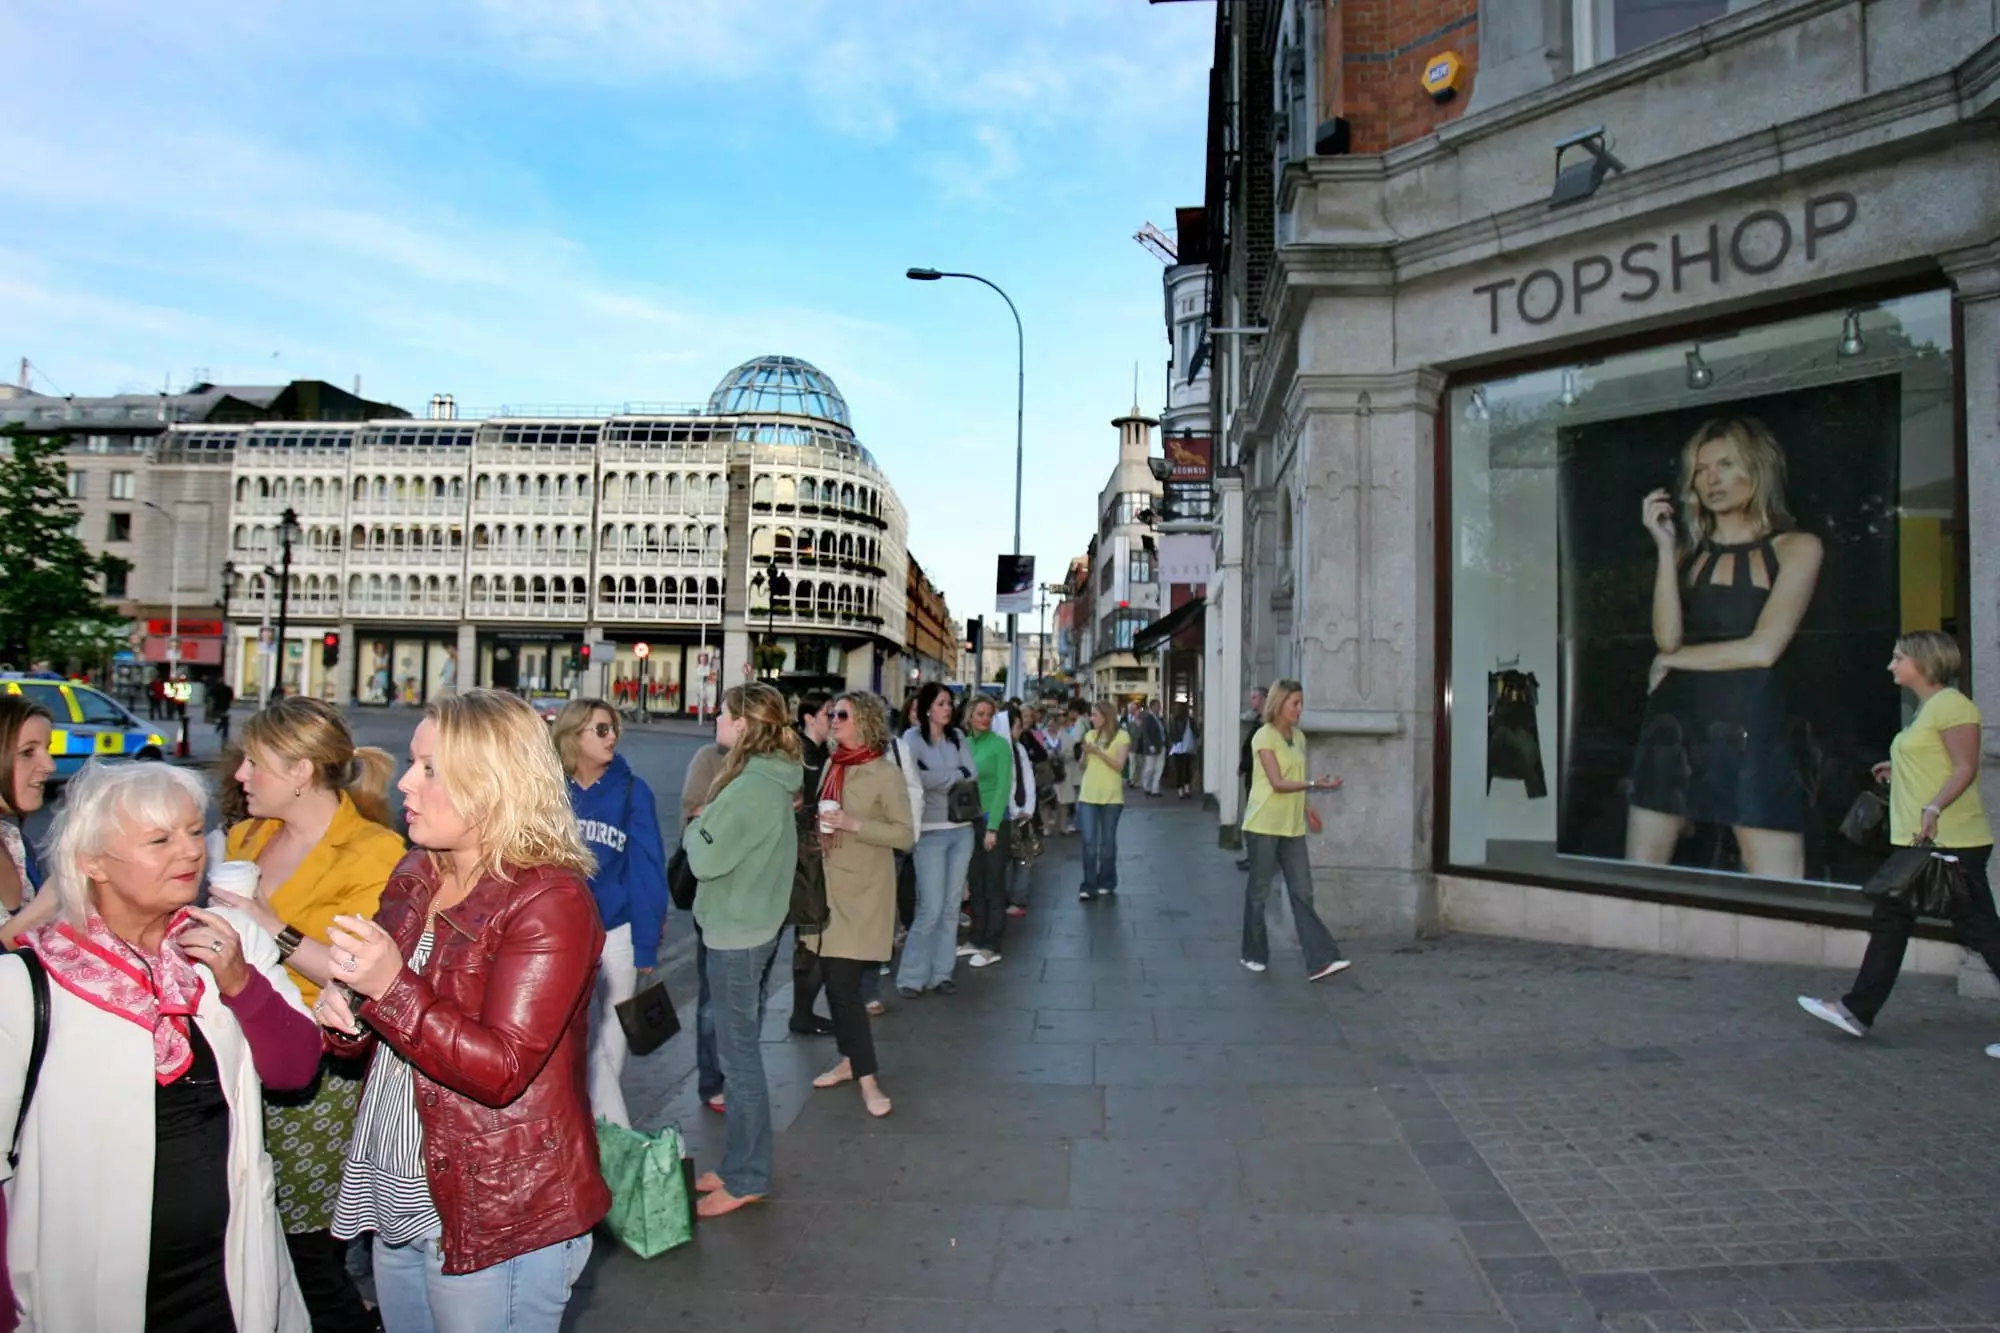 In its heyday, we'd queue around the block for Topshop (